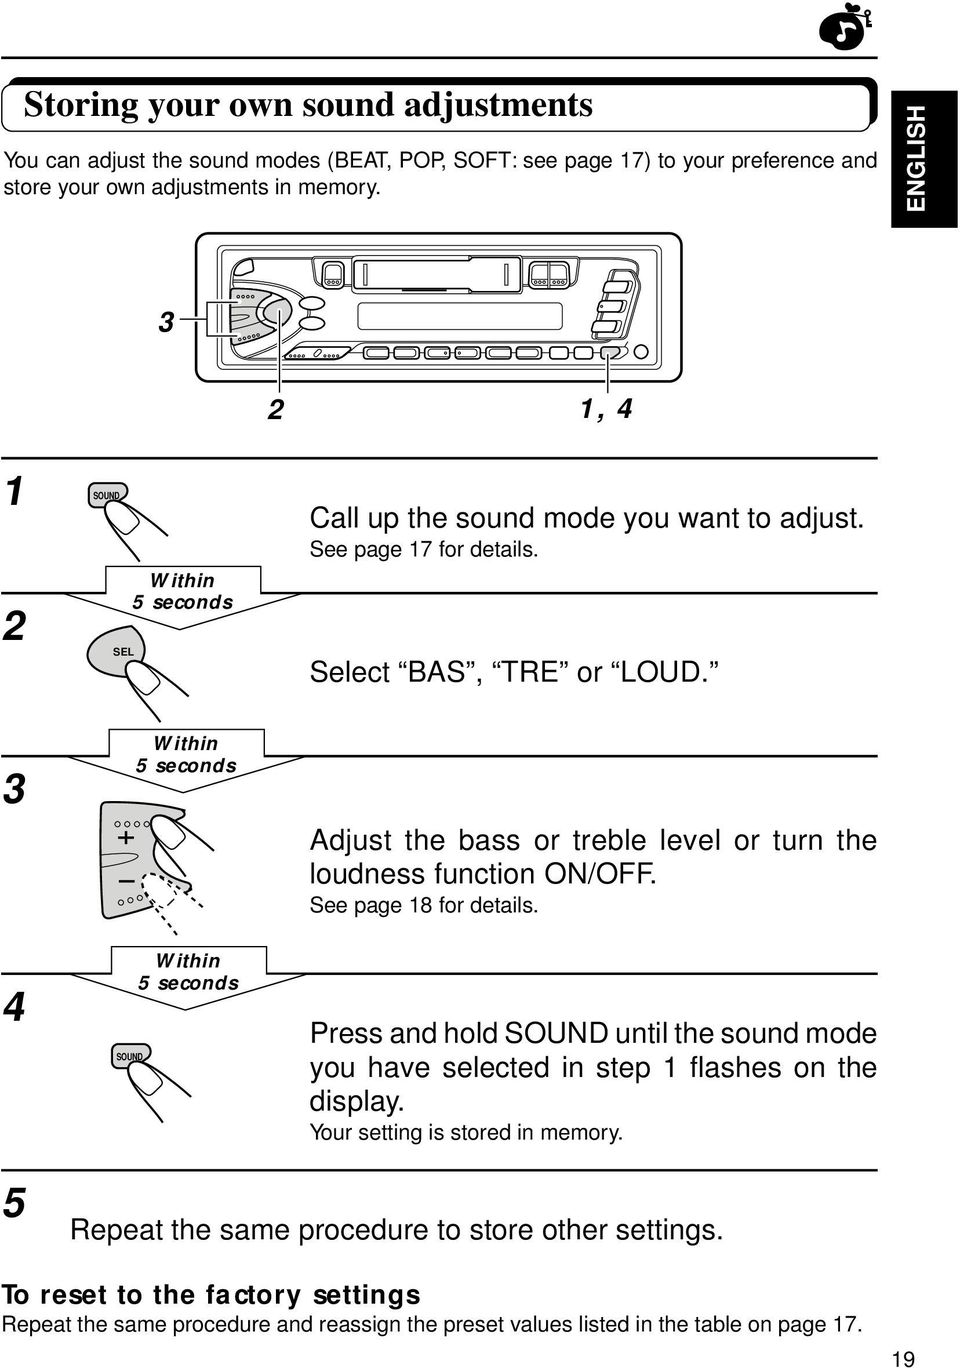 Adjust the bass or treble level or turn the loudness function ON/OFF. See page 8 for details.